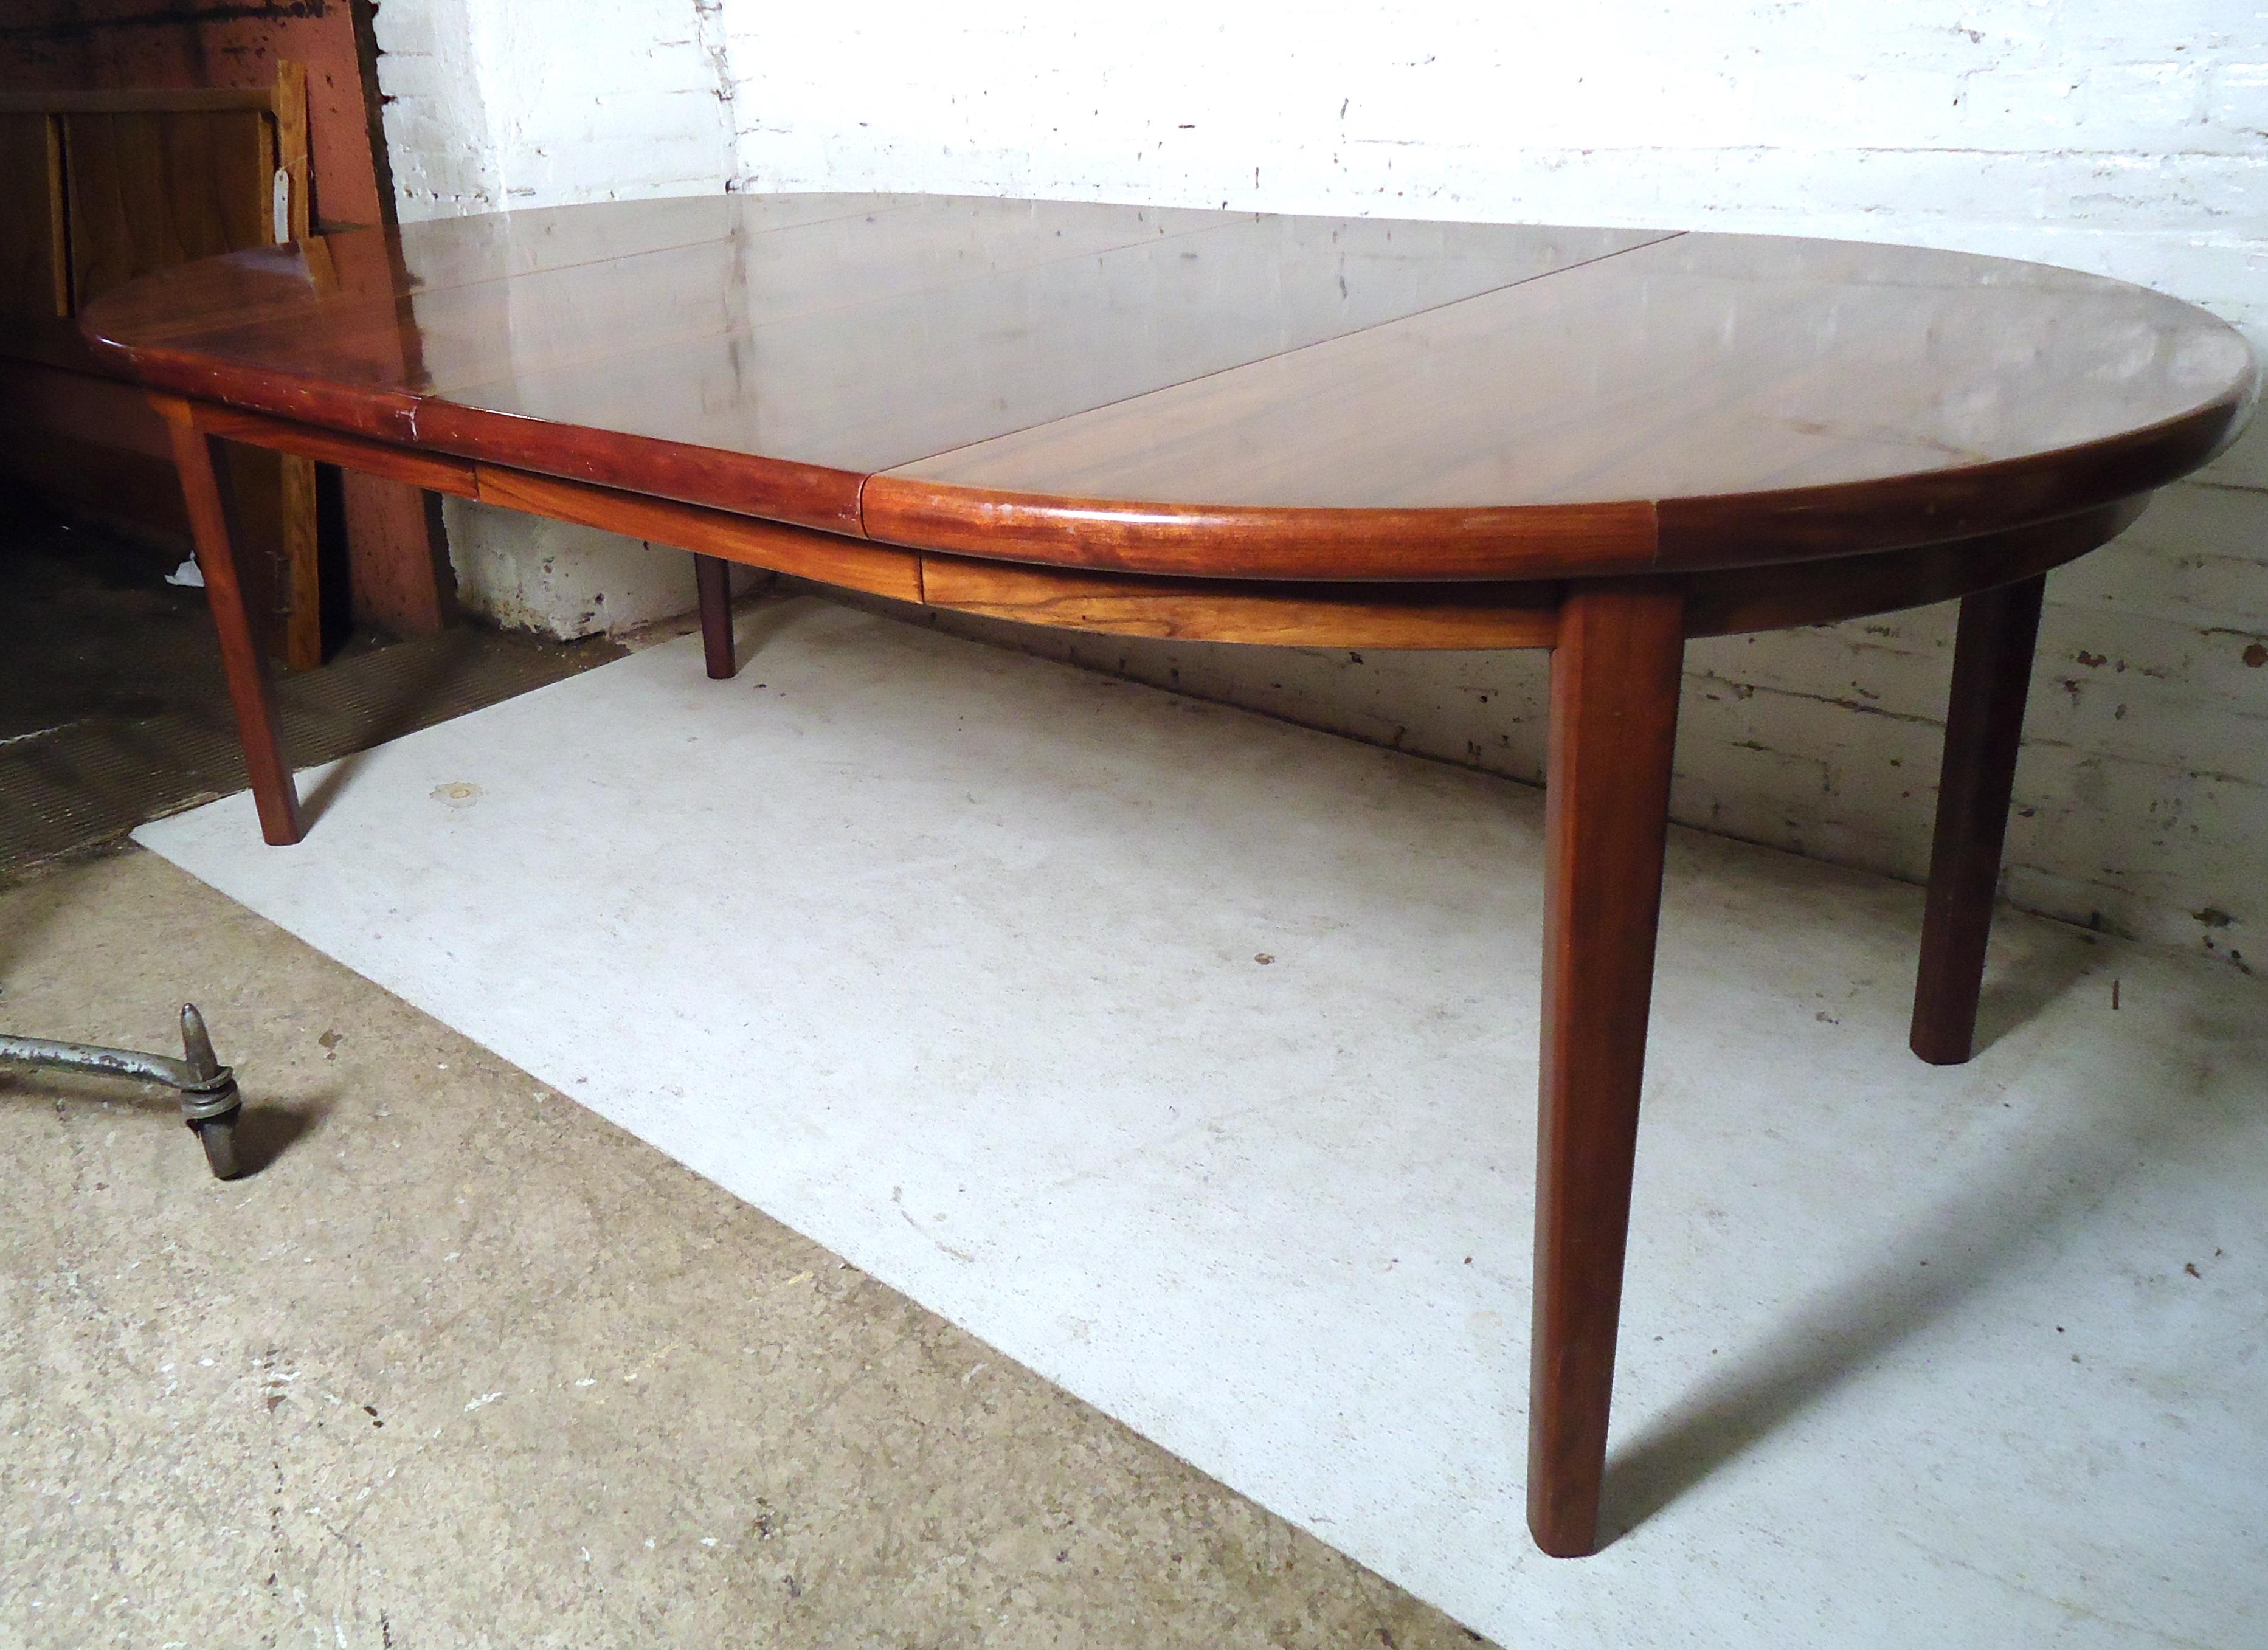 Gorgeous vintage modern Danish extendable dining table featured in rich rosewood grain by Rasmus. The table is extended from 46